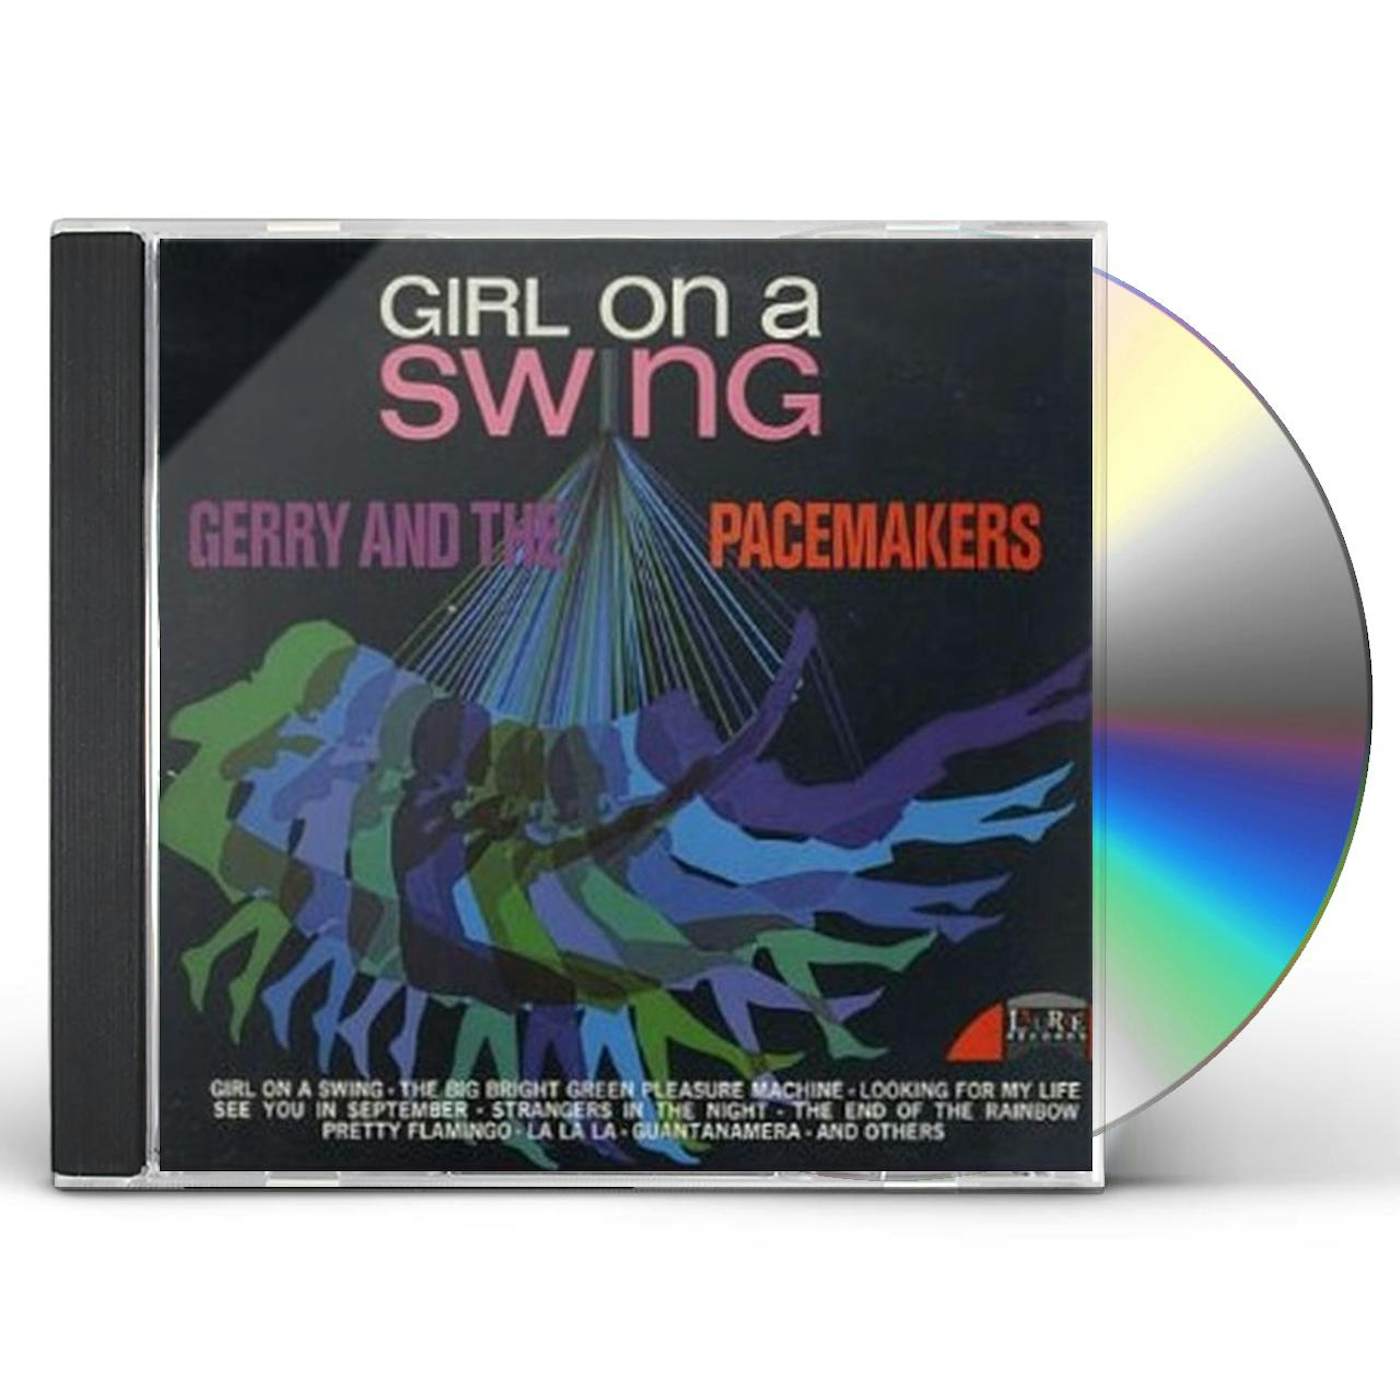 Gerry & The Pacemakers GIRL ON A SWING CD